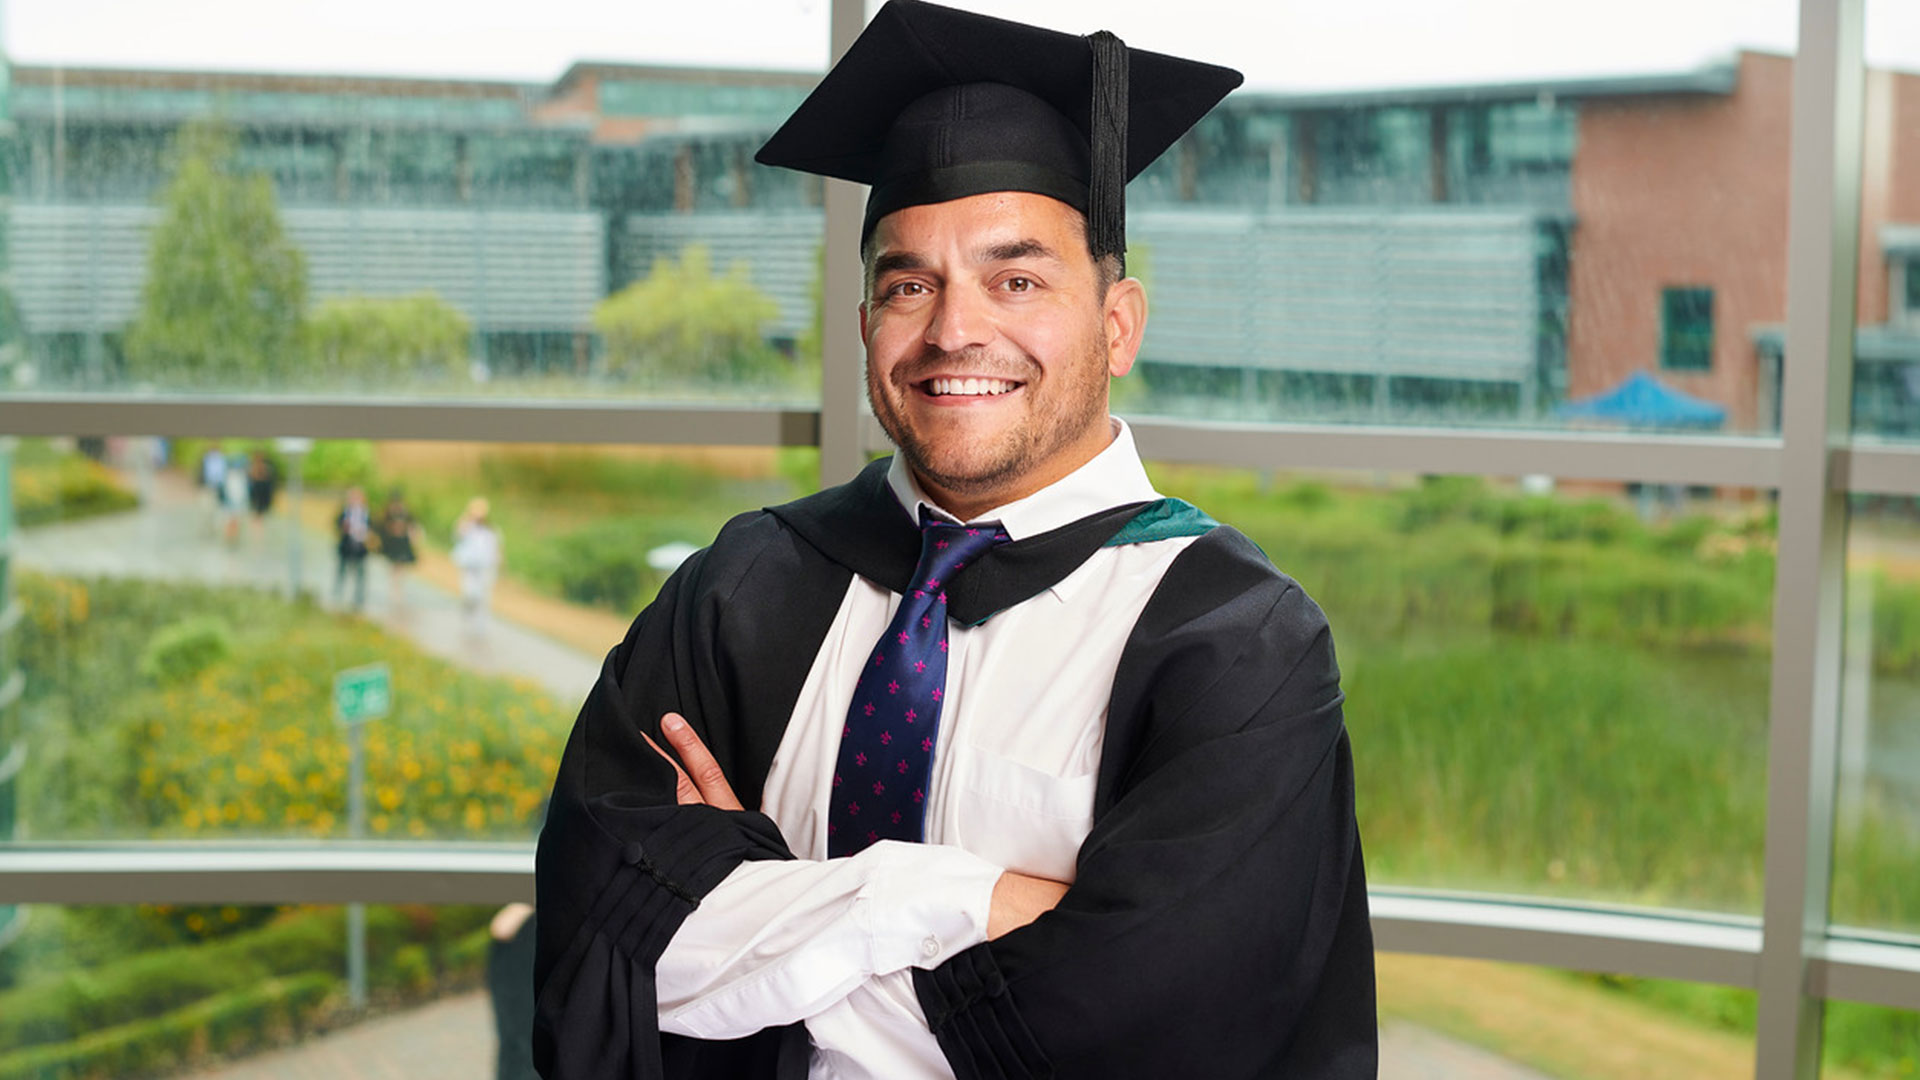 Alumni student Daniel Pitts in the Faculty of Health, Social Care and Medicine